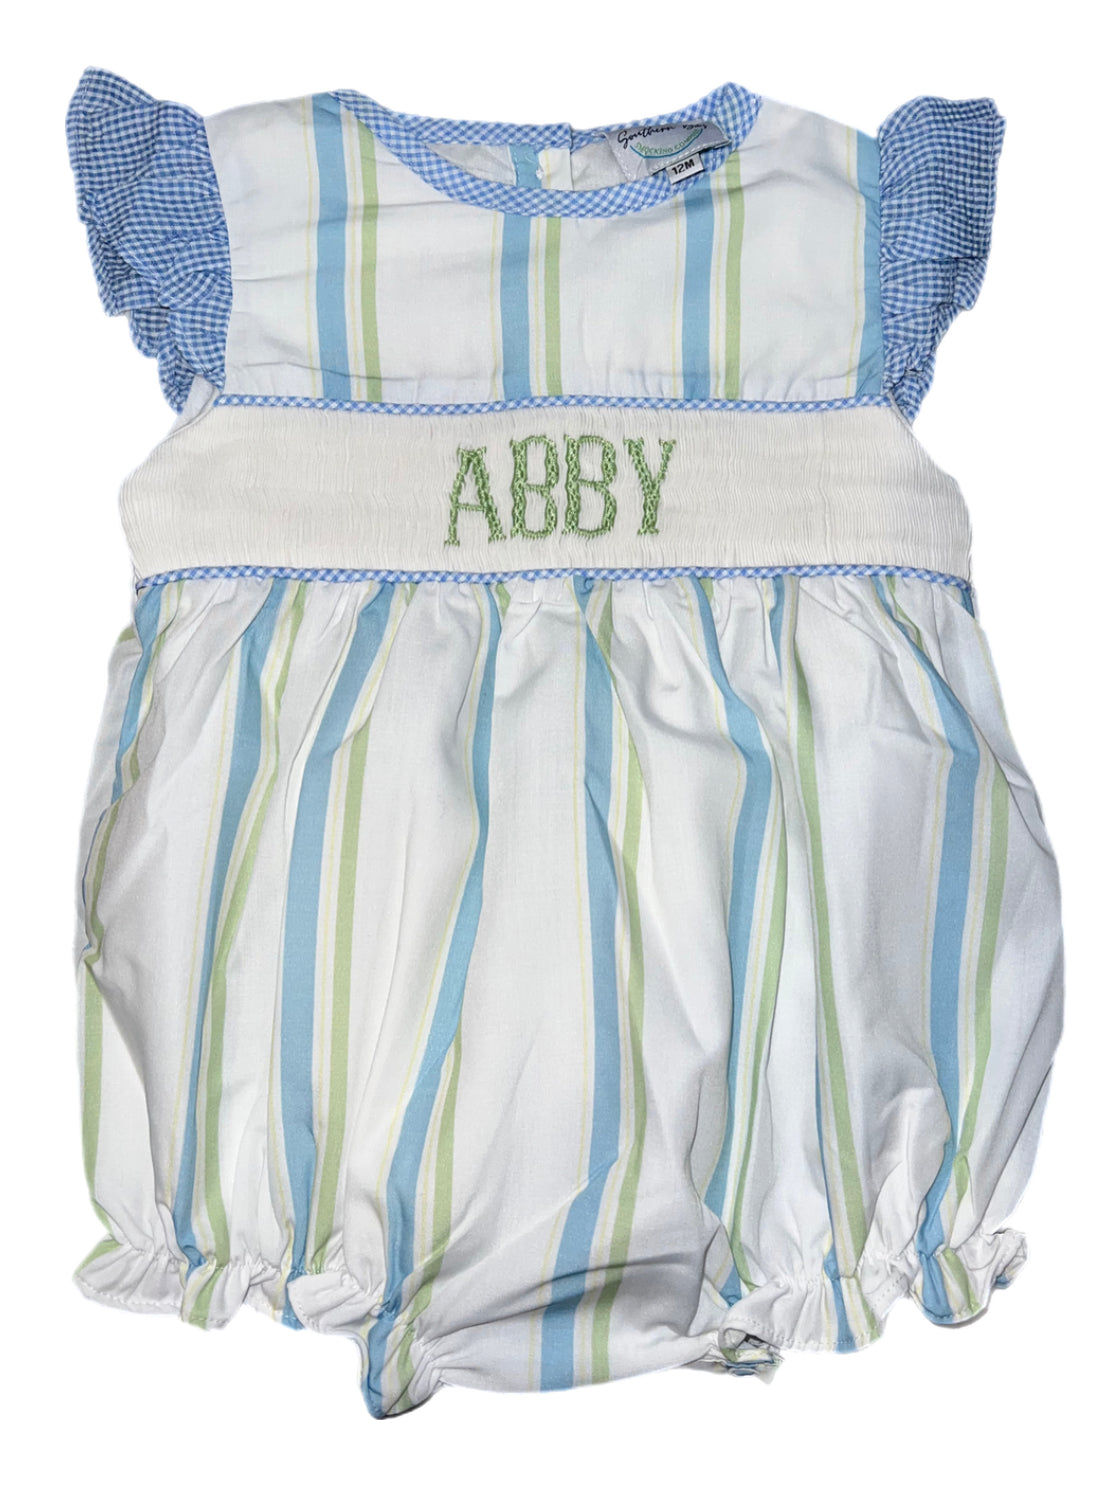 RTS: SBSC- Name Smock Collection- Brooks Stripes- Girls Woven Bubble “Abby”